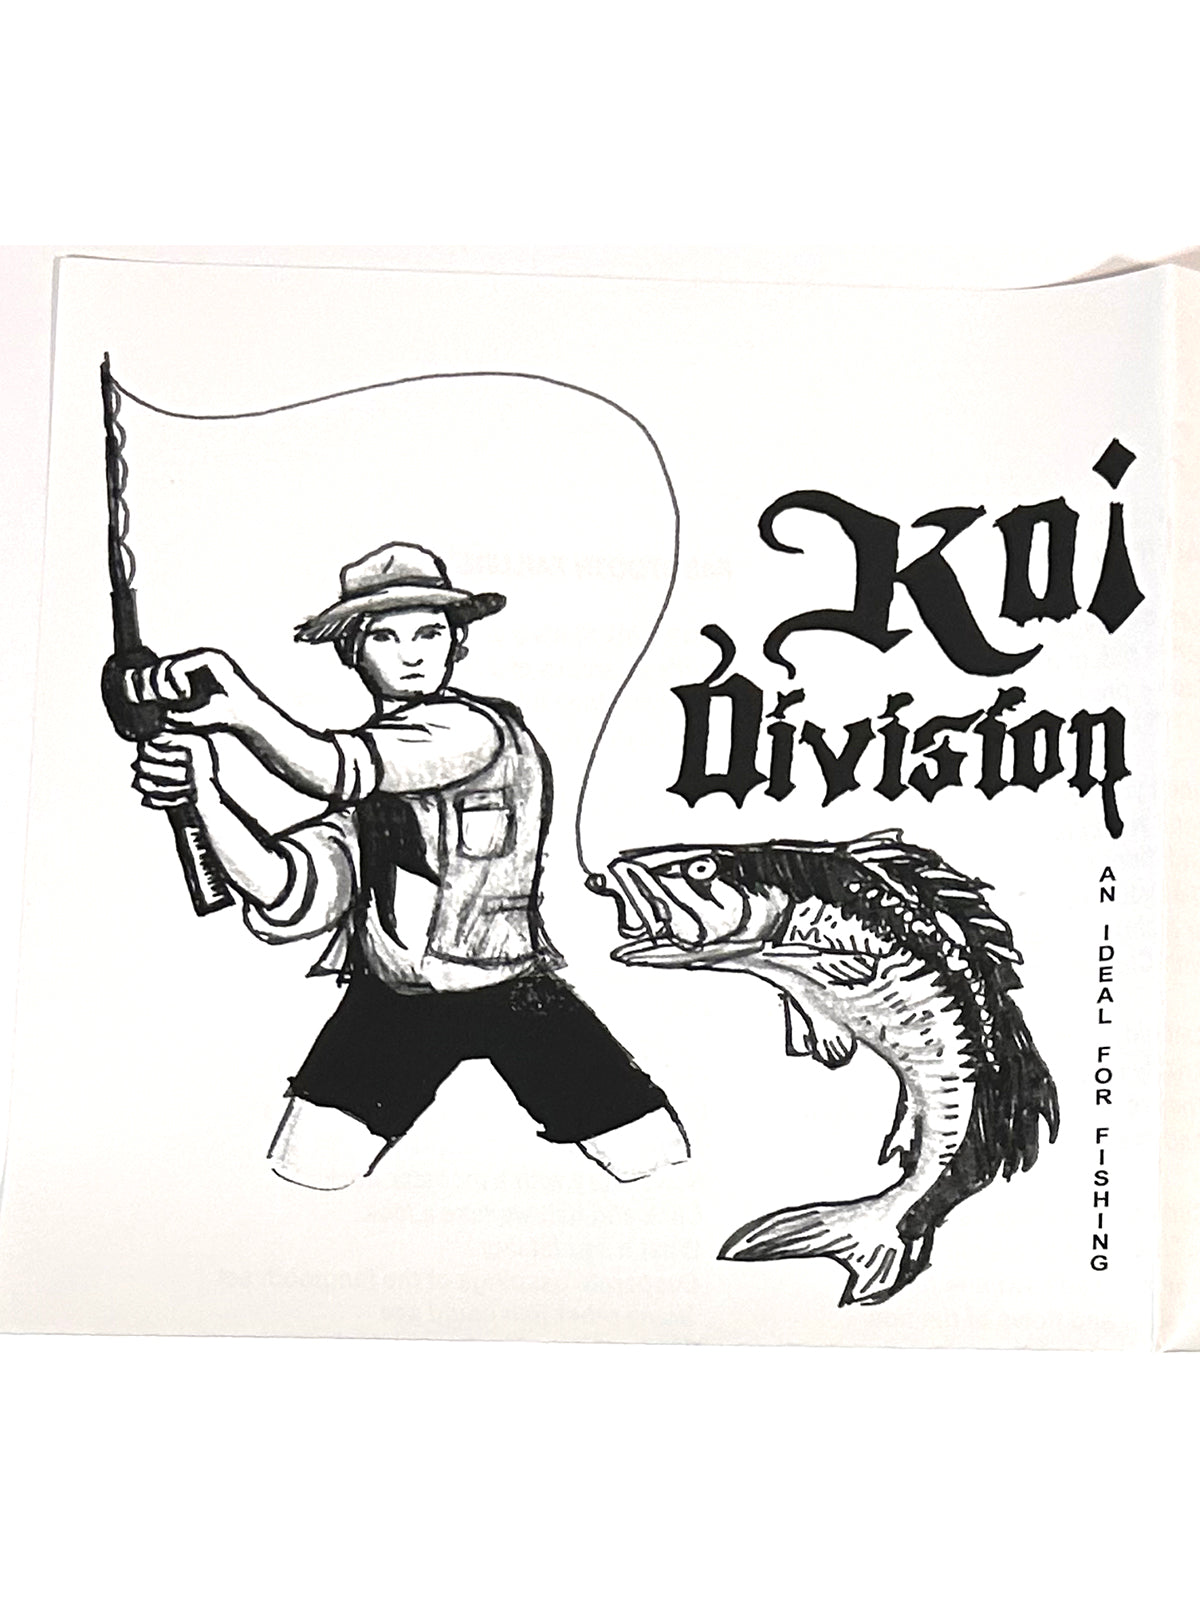 KOI DIVISION "AN IDEAL FOR FISHING" 4 SONG VINYL EP